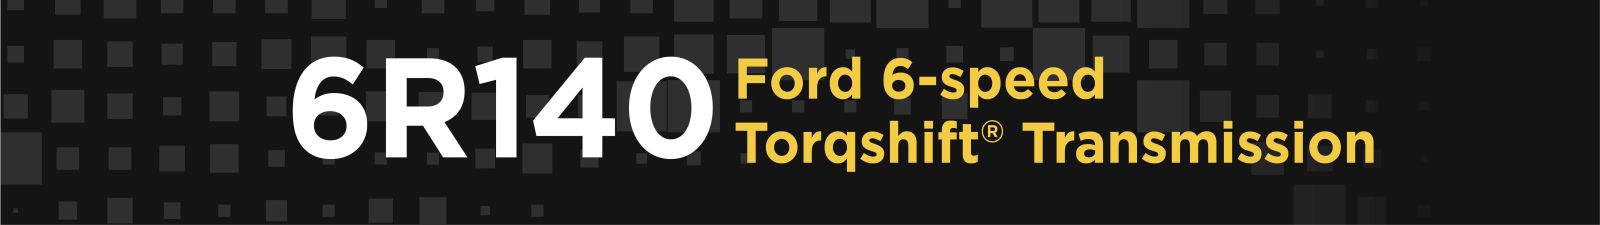 A banner displaying the words 6R140 Ford 6-speed Torqshift transmission